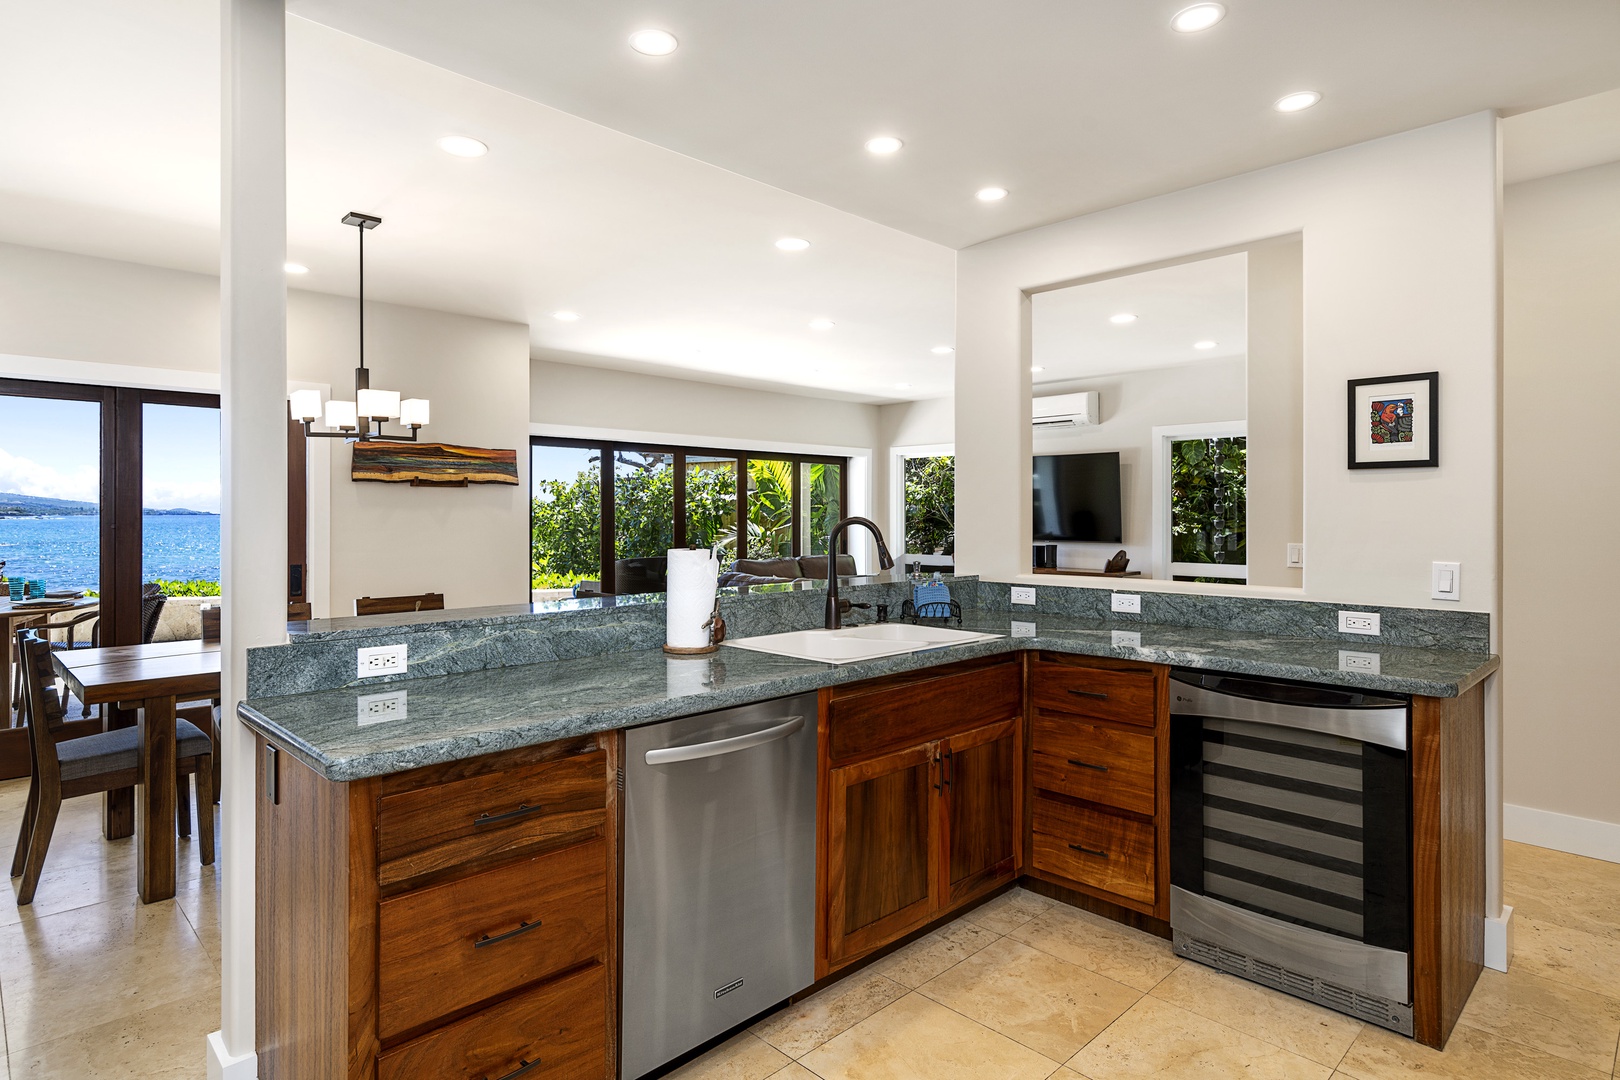 Kailua Kona Vacation Rentals, Ali'i Point #7 - The large gourmet kitchen has been completely upgraded with granite countertops, Koa cabinets, and new stainless-steel appliances